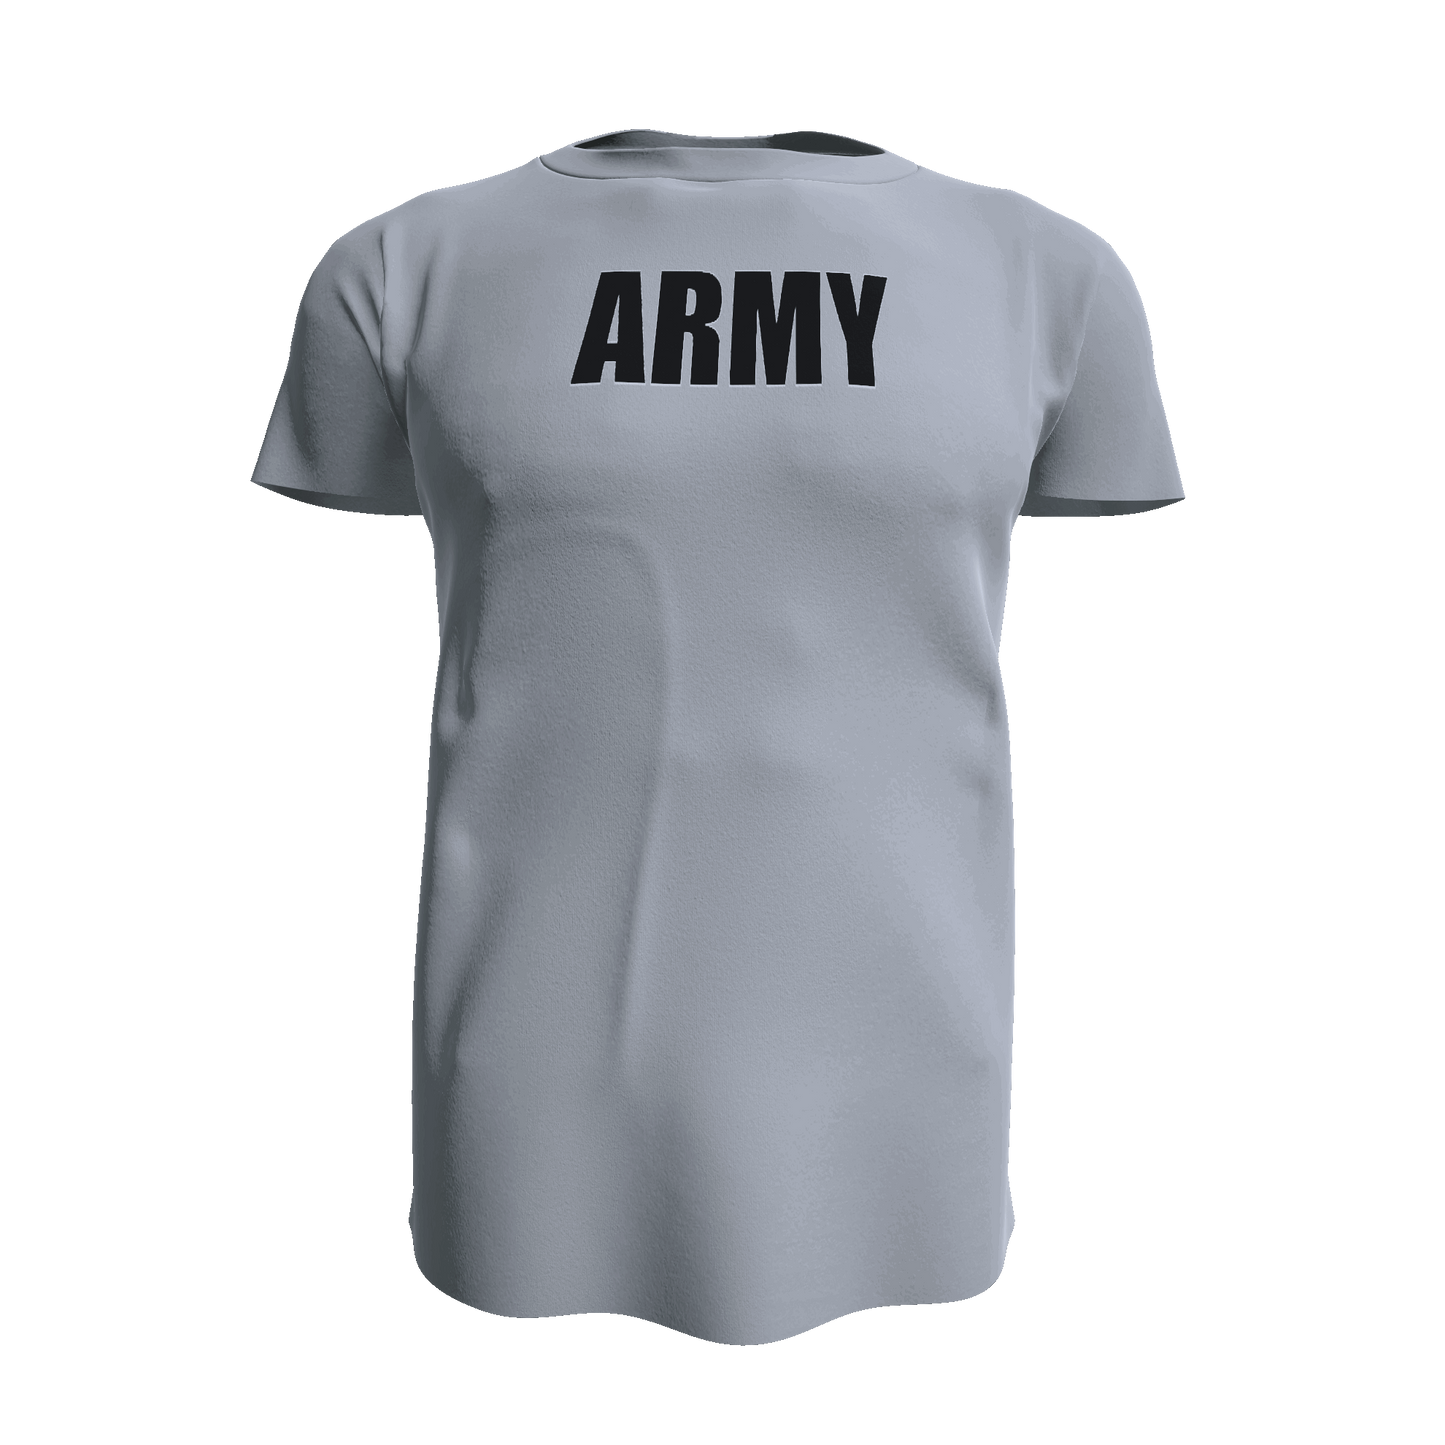 Army T Shirt - Army 1157 kit S / Grey Army 1157 Kit Veterans Owned Business